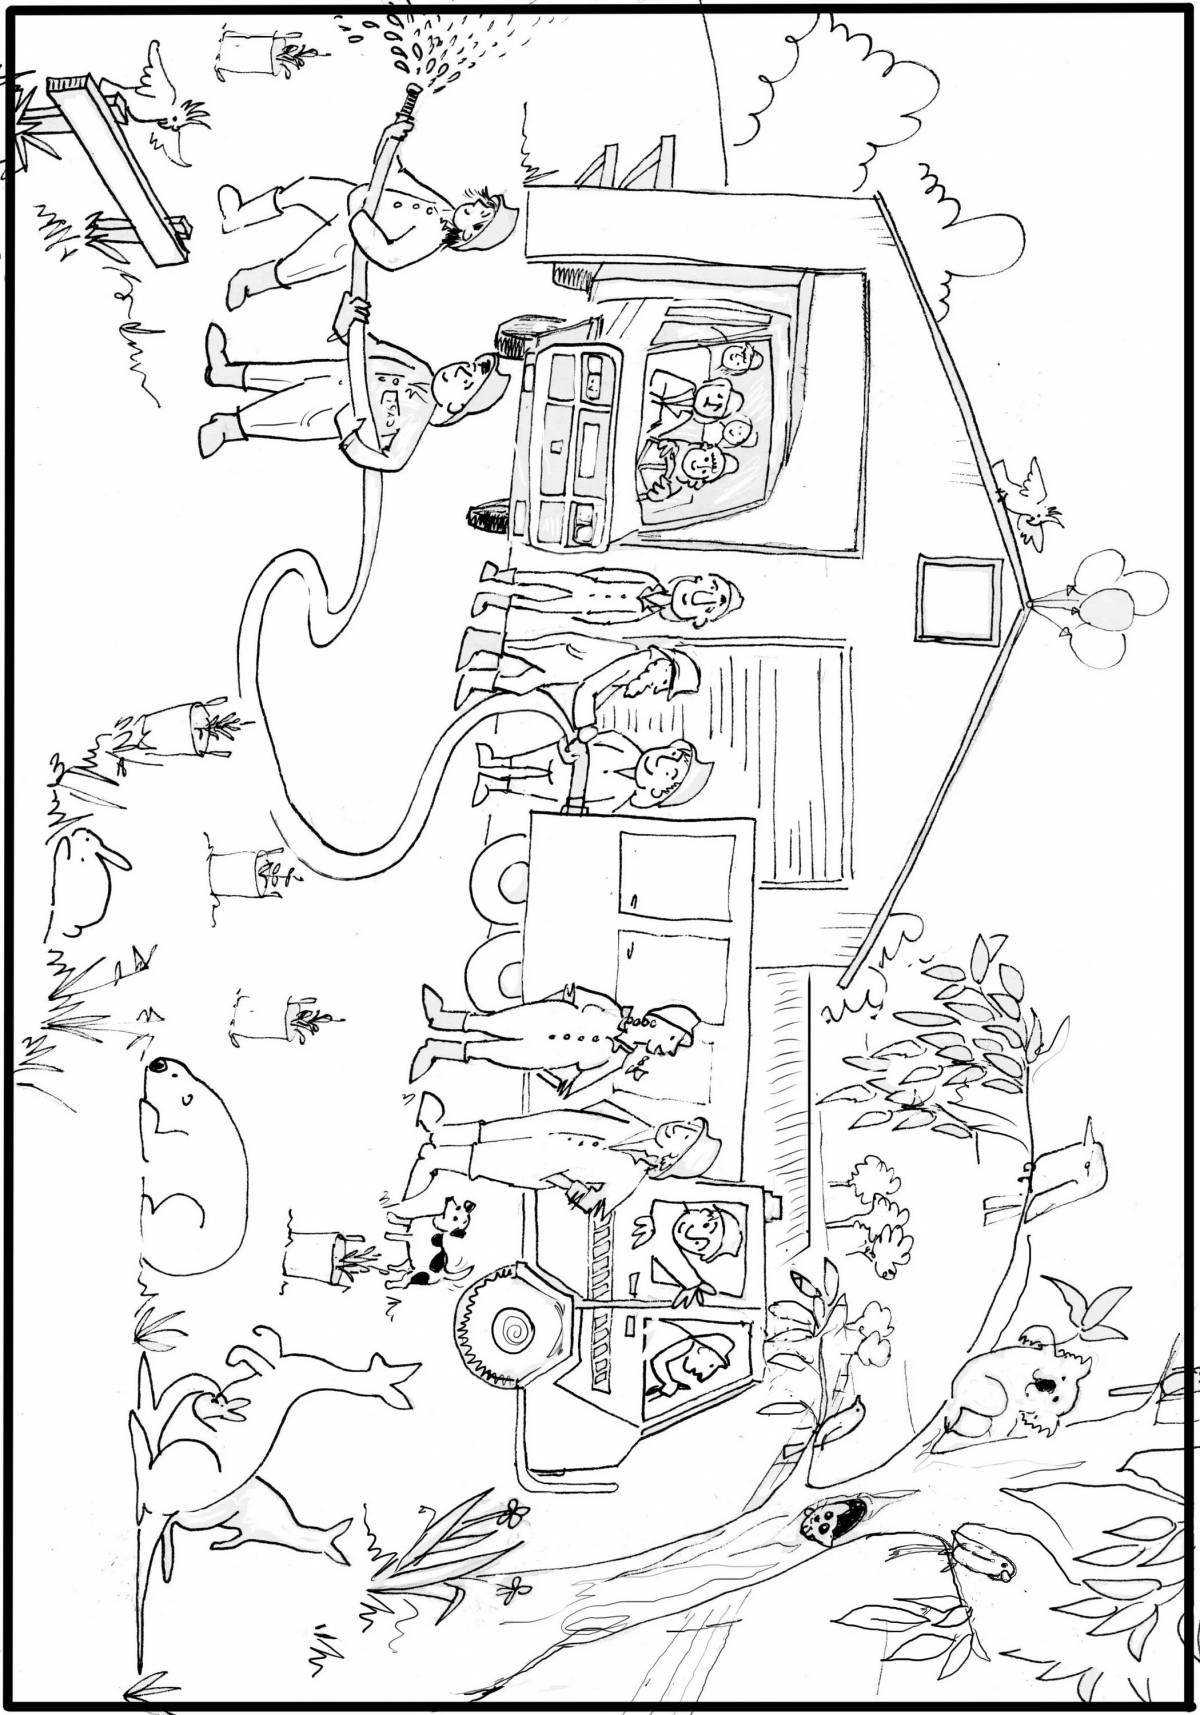 Comic fire station coloring book